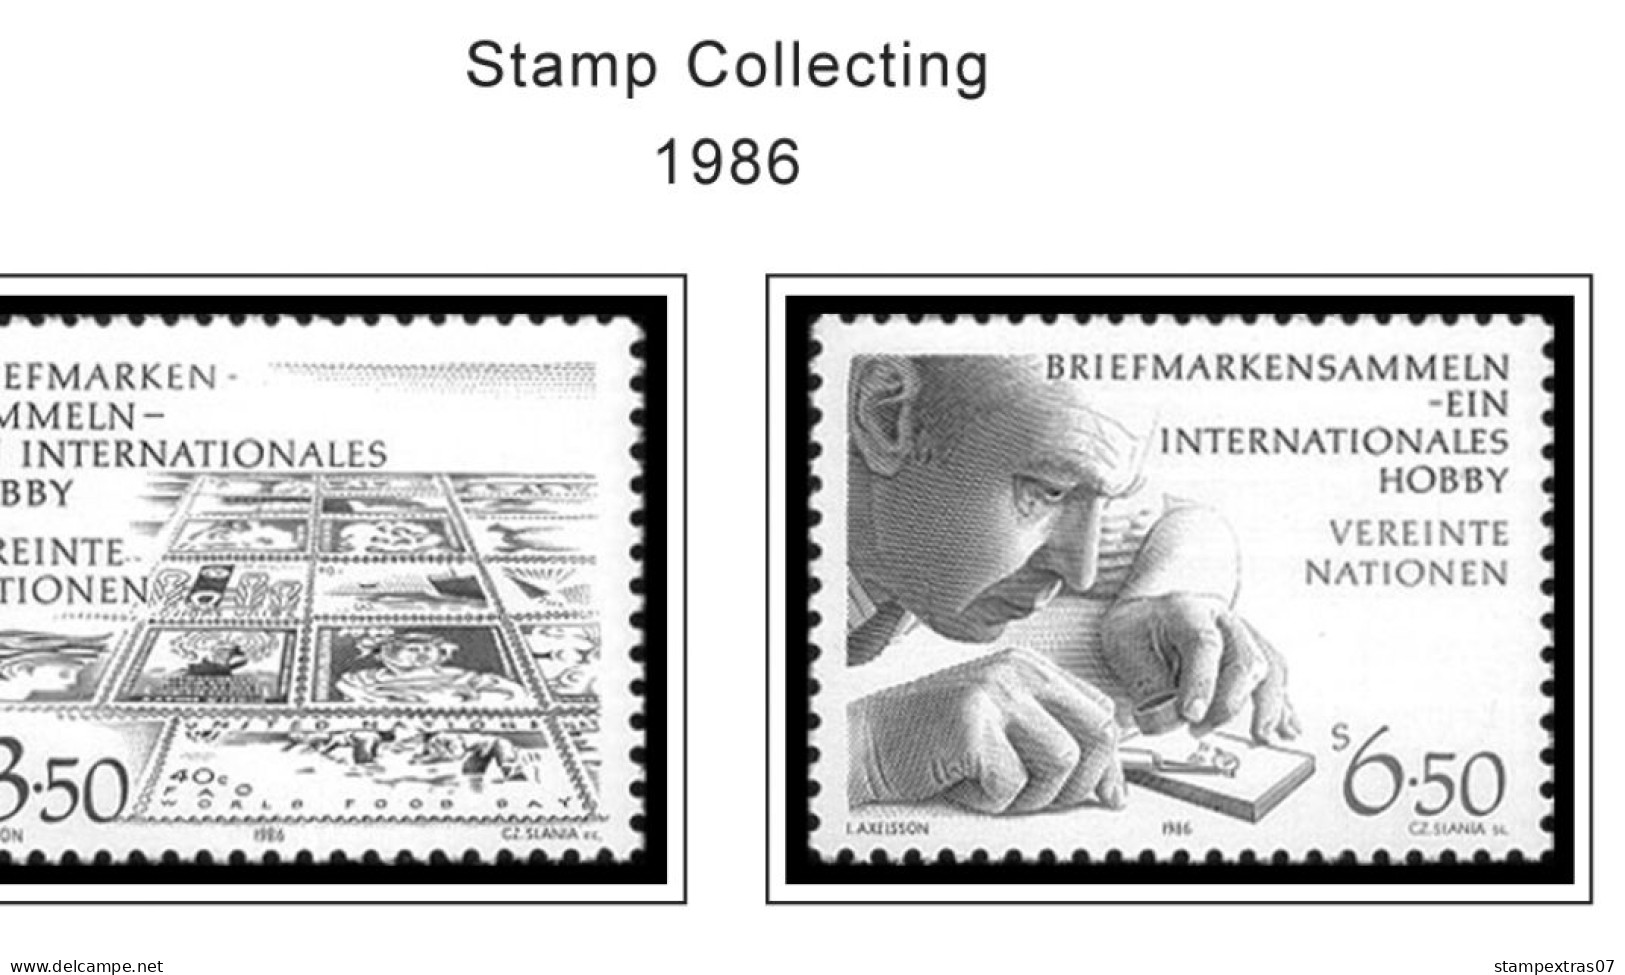 UNITED NATIONS - VIENNA 1979-2020 STAMP ALBUM PAGES (165 B&w Illustrated Pages) - Anglais